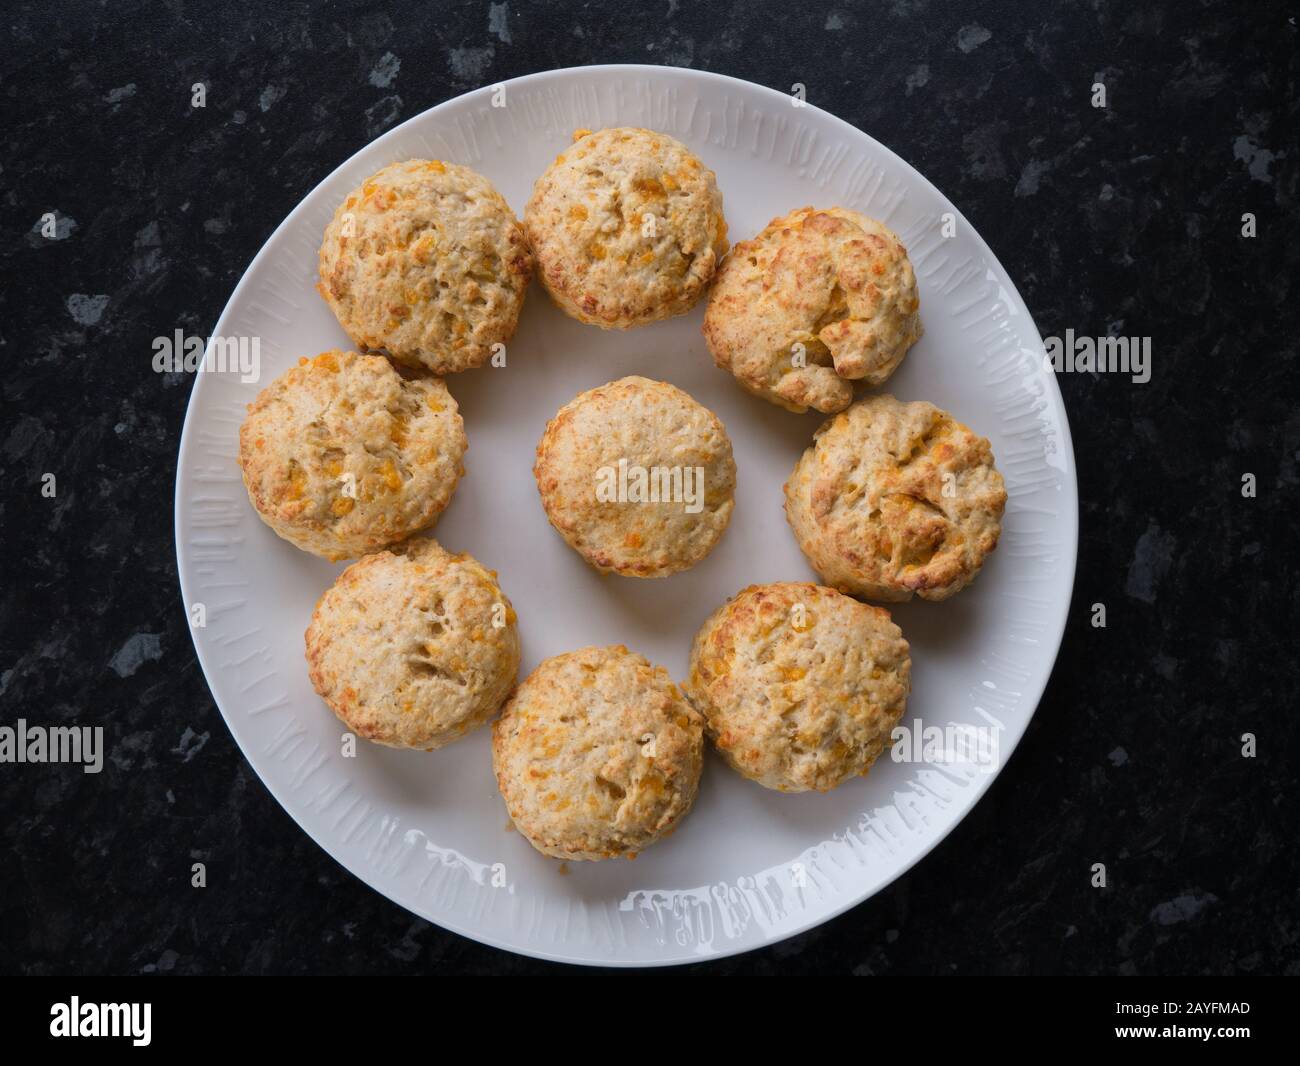 Home-made cheese scones Stock Photo